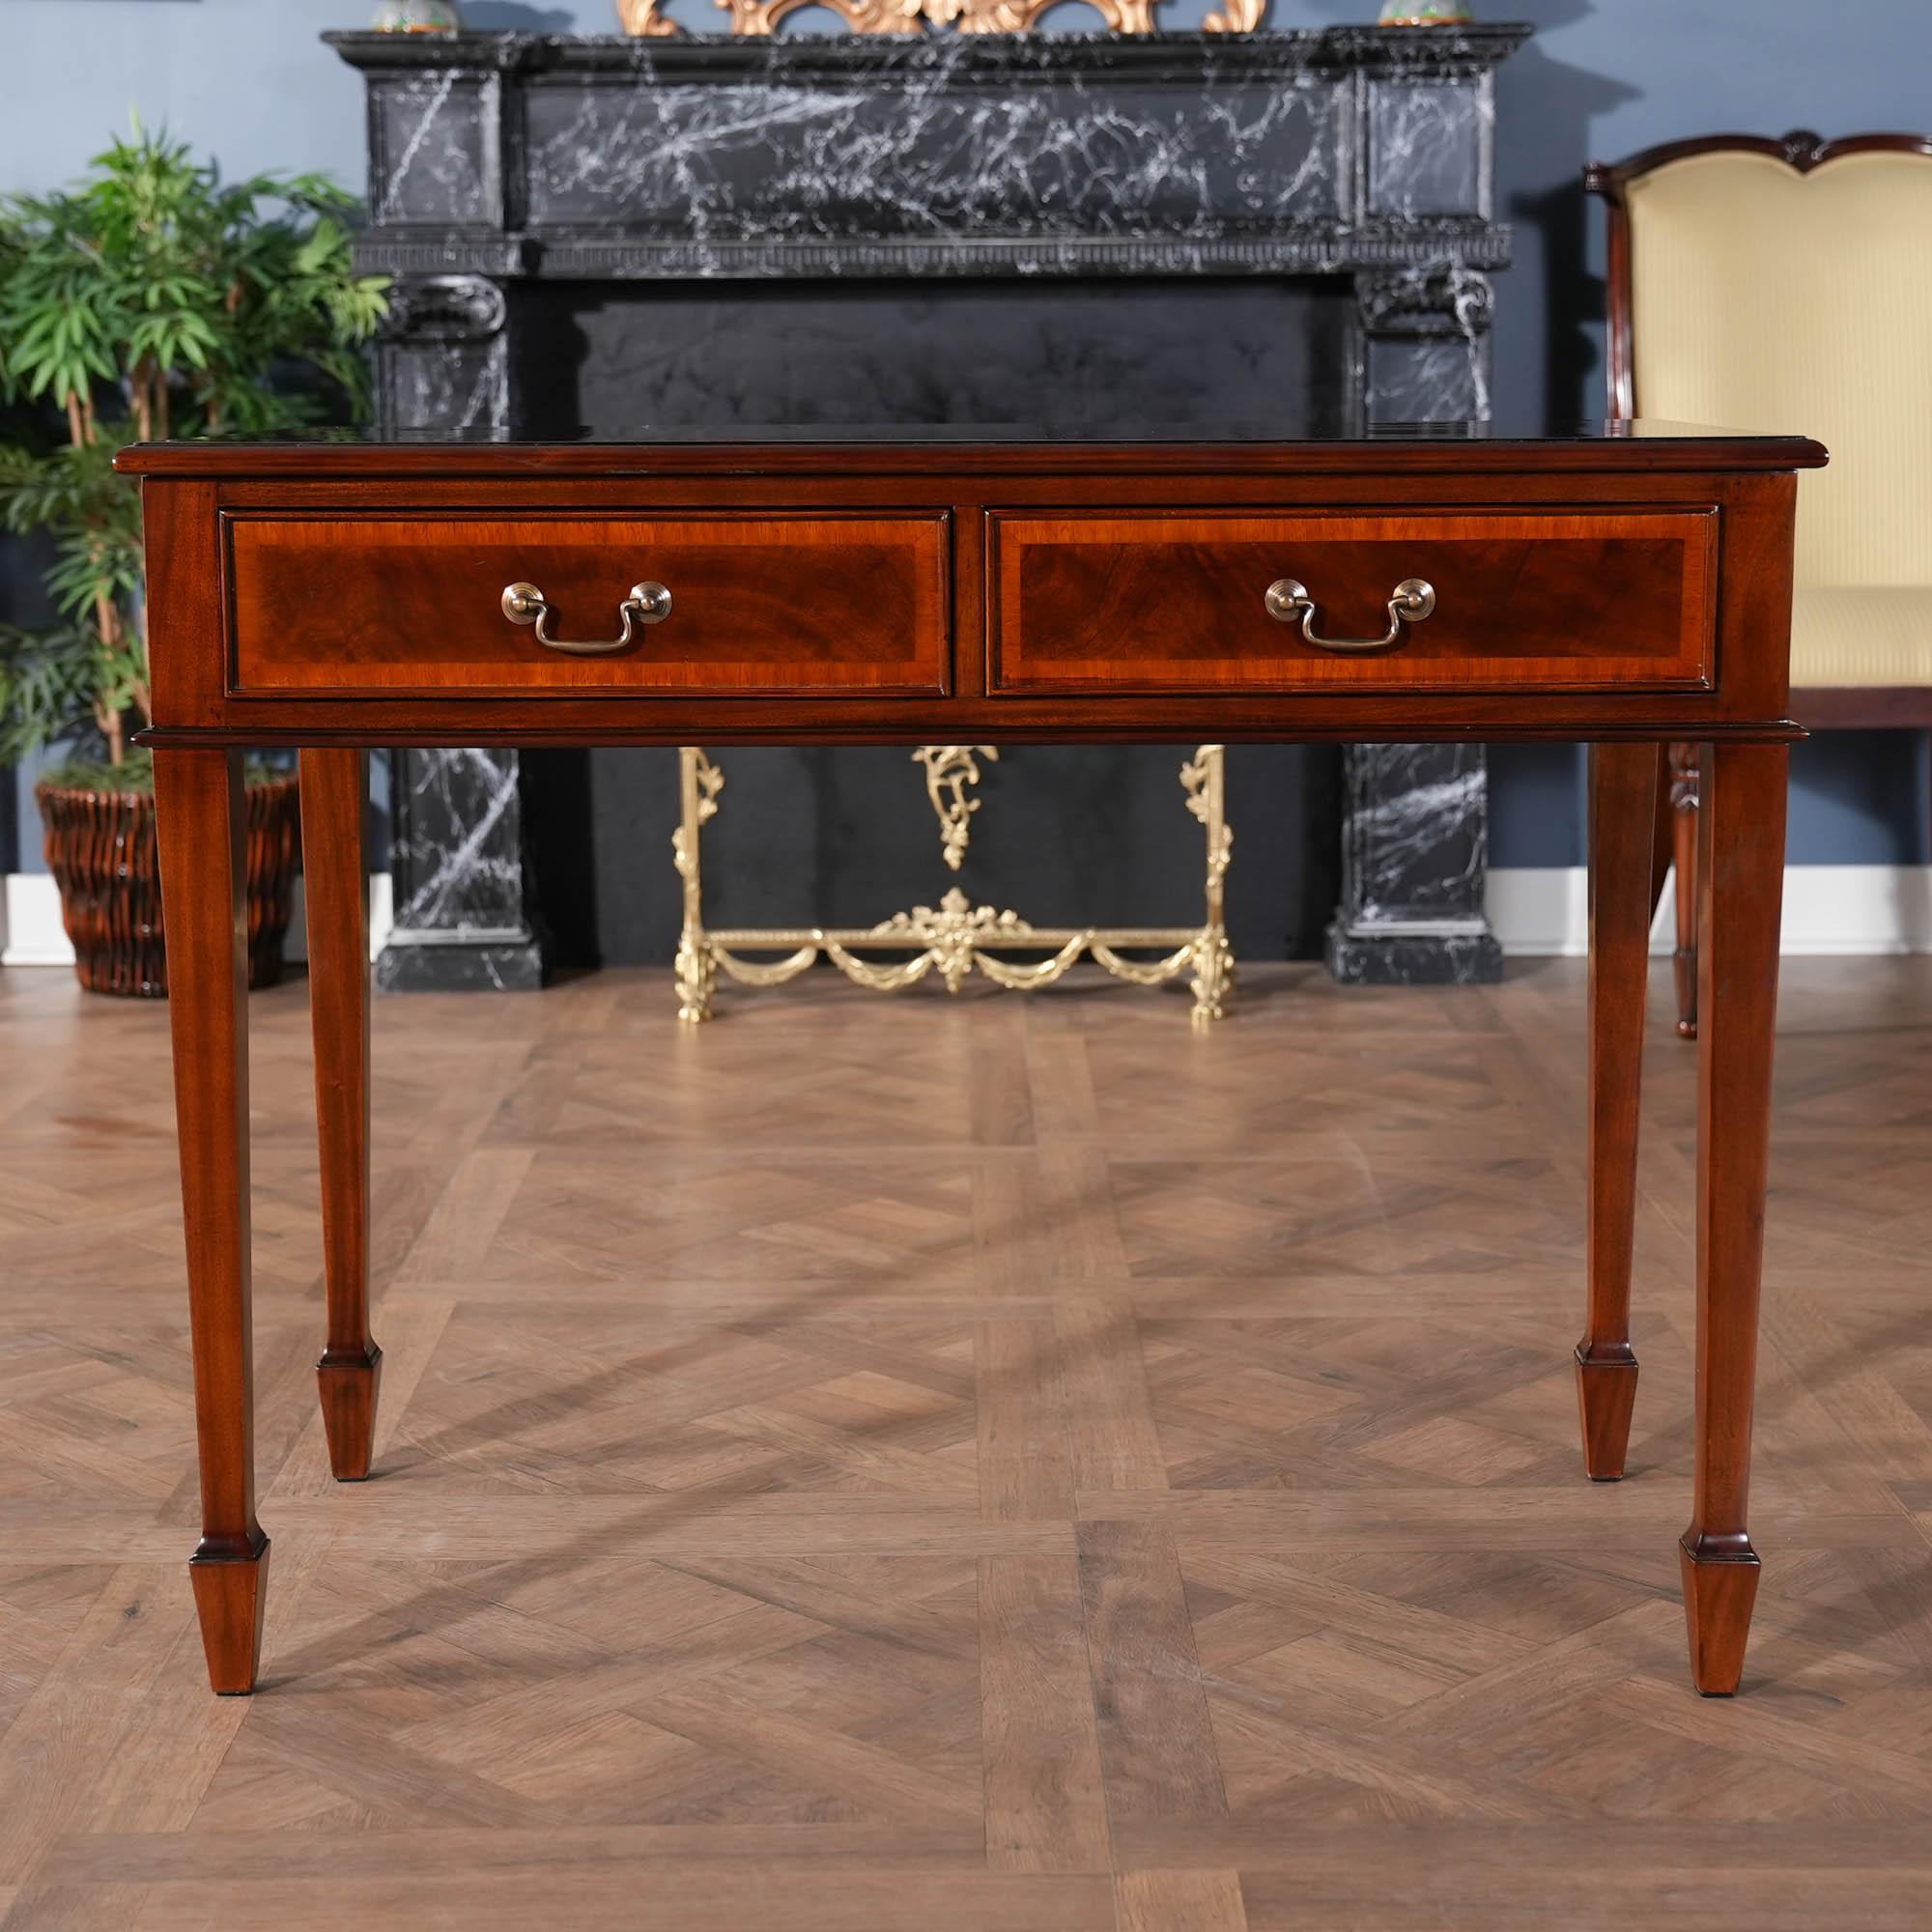 A high quality Small Mahogany Banded Desk from Niagara Furniture made of mahogany and satinwood with solid brass drawer pulls. The two dovetailed drawers denote high quality construction and the elegant tapered legs end in a popular spade foot